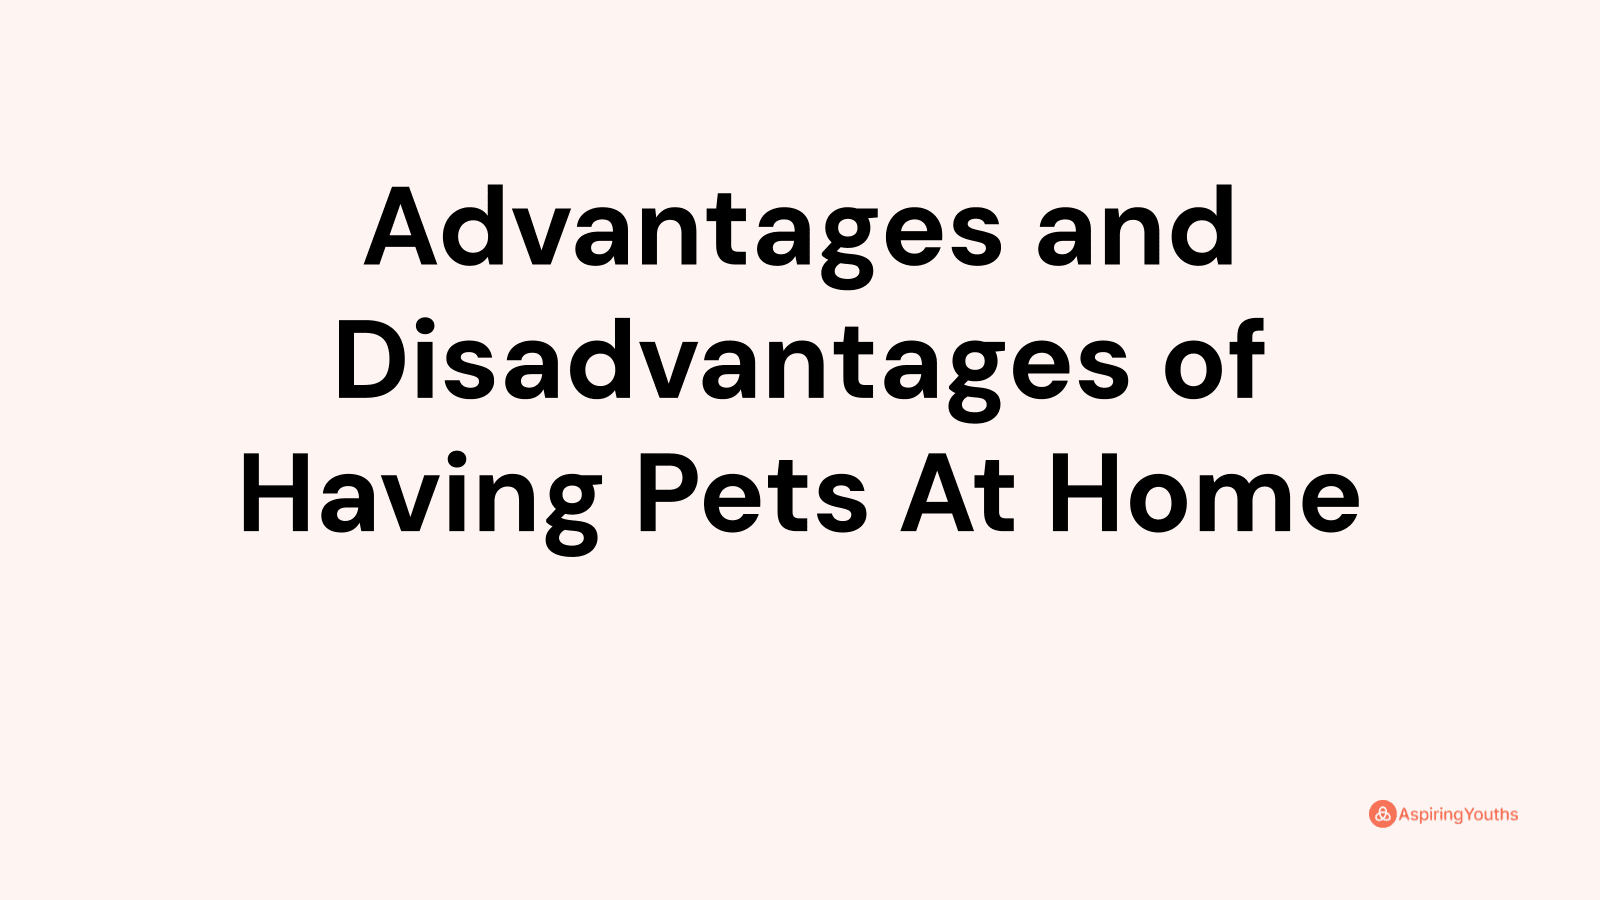 Advantages and disadvantages of Having Pets At Home